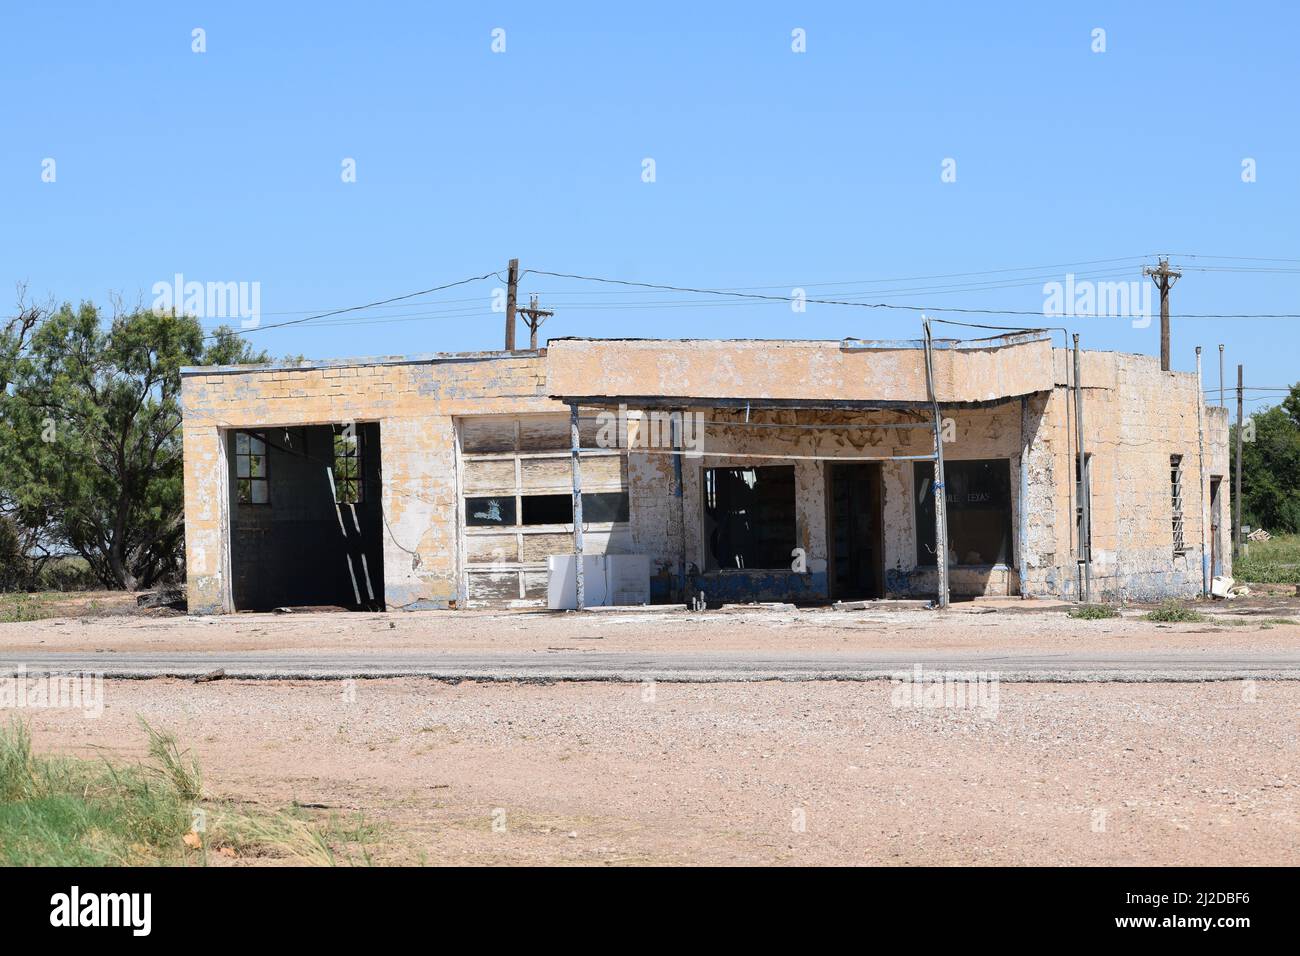 Abandoned service station in Rule Texas - August 2021 Stock Photo